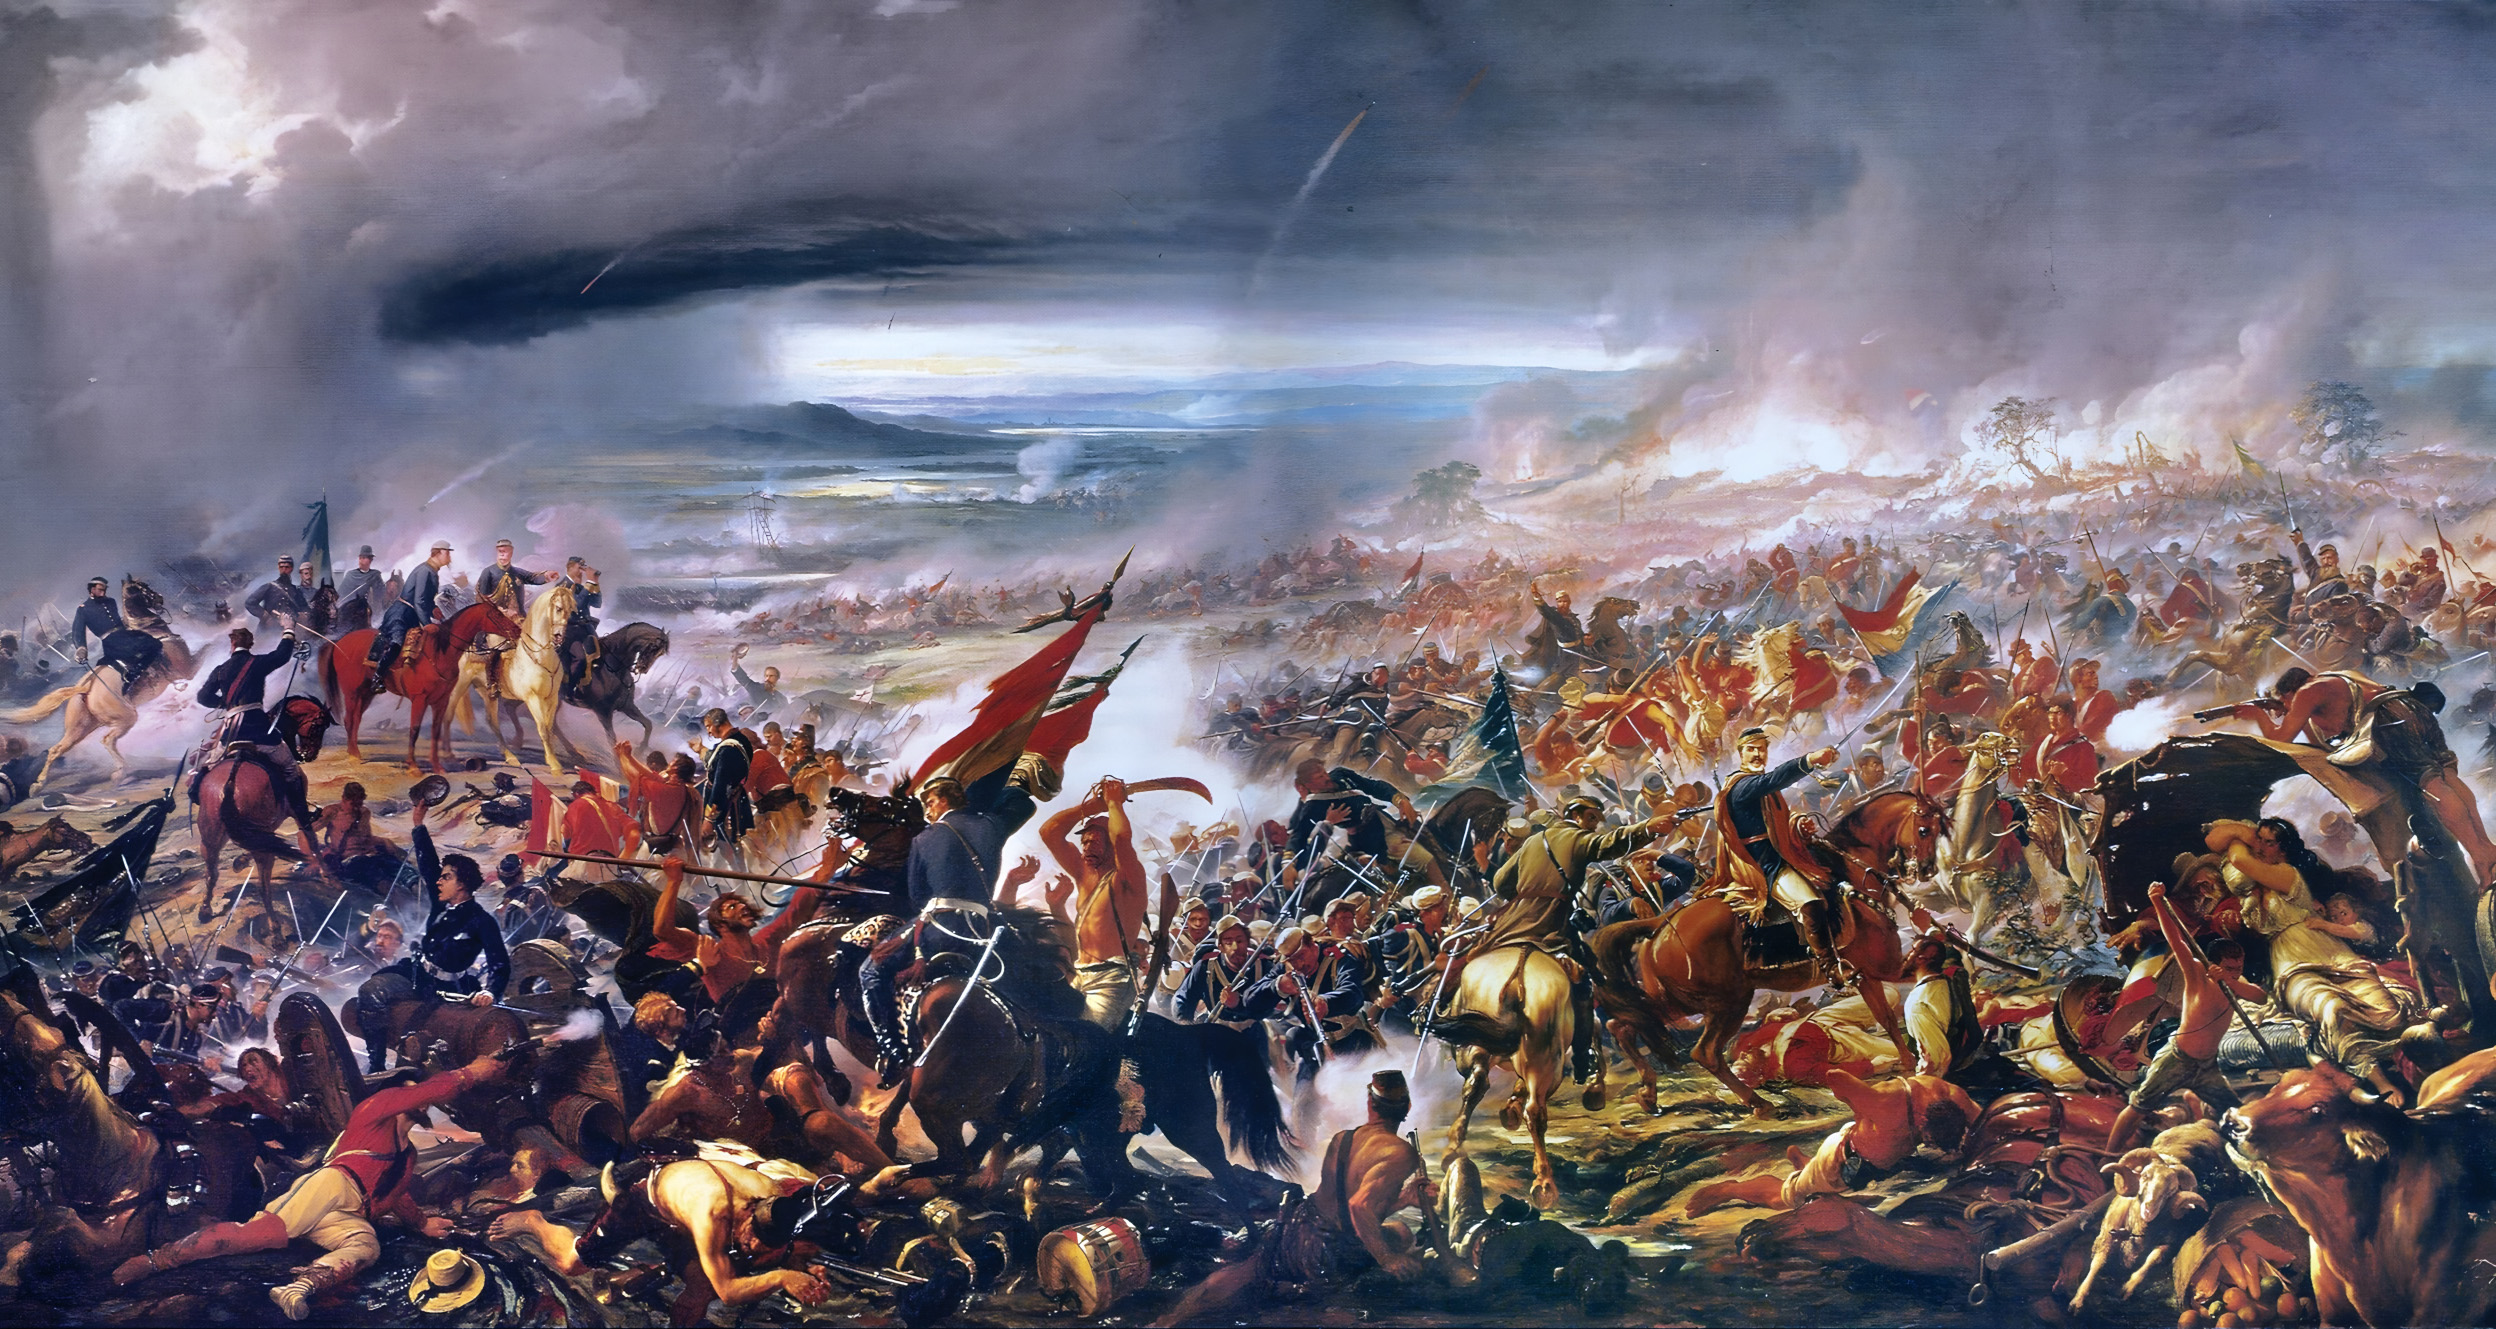 The Battle of Tuyuti, on May 24, 1866, was the largest battle of the grueling five-year War of the Triple Alliance.